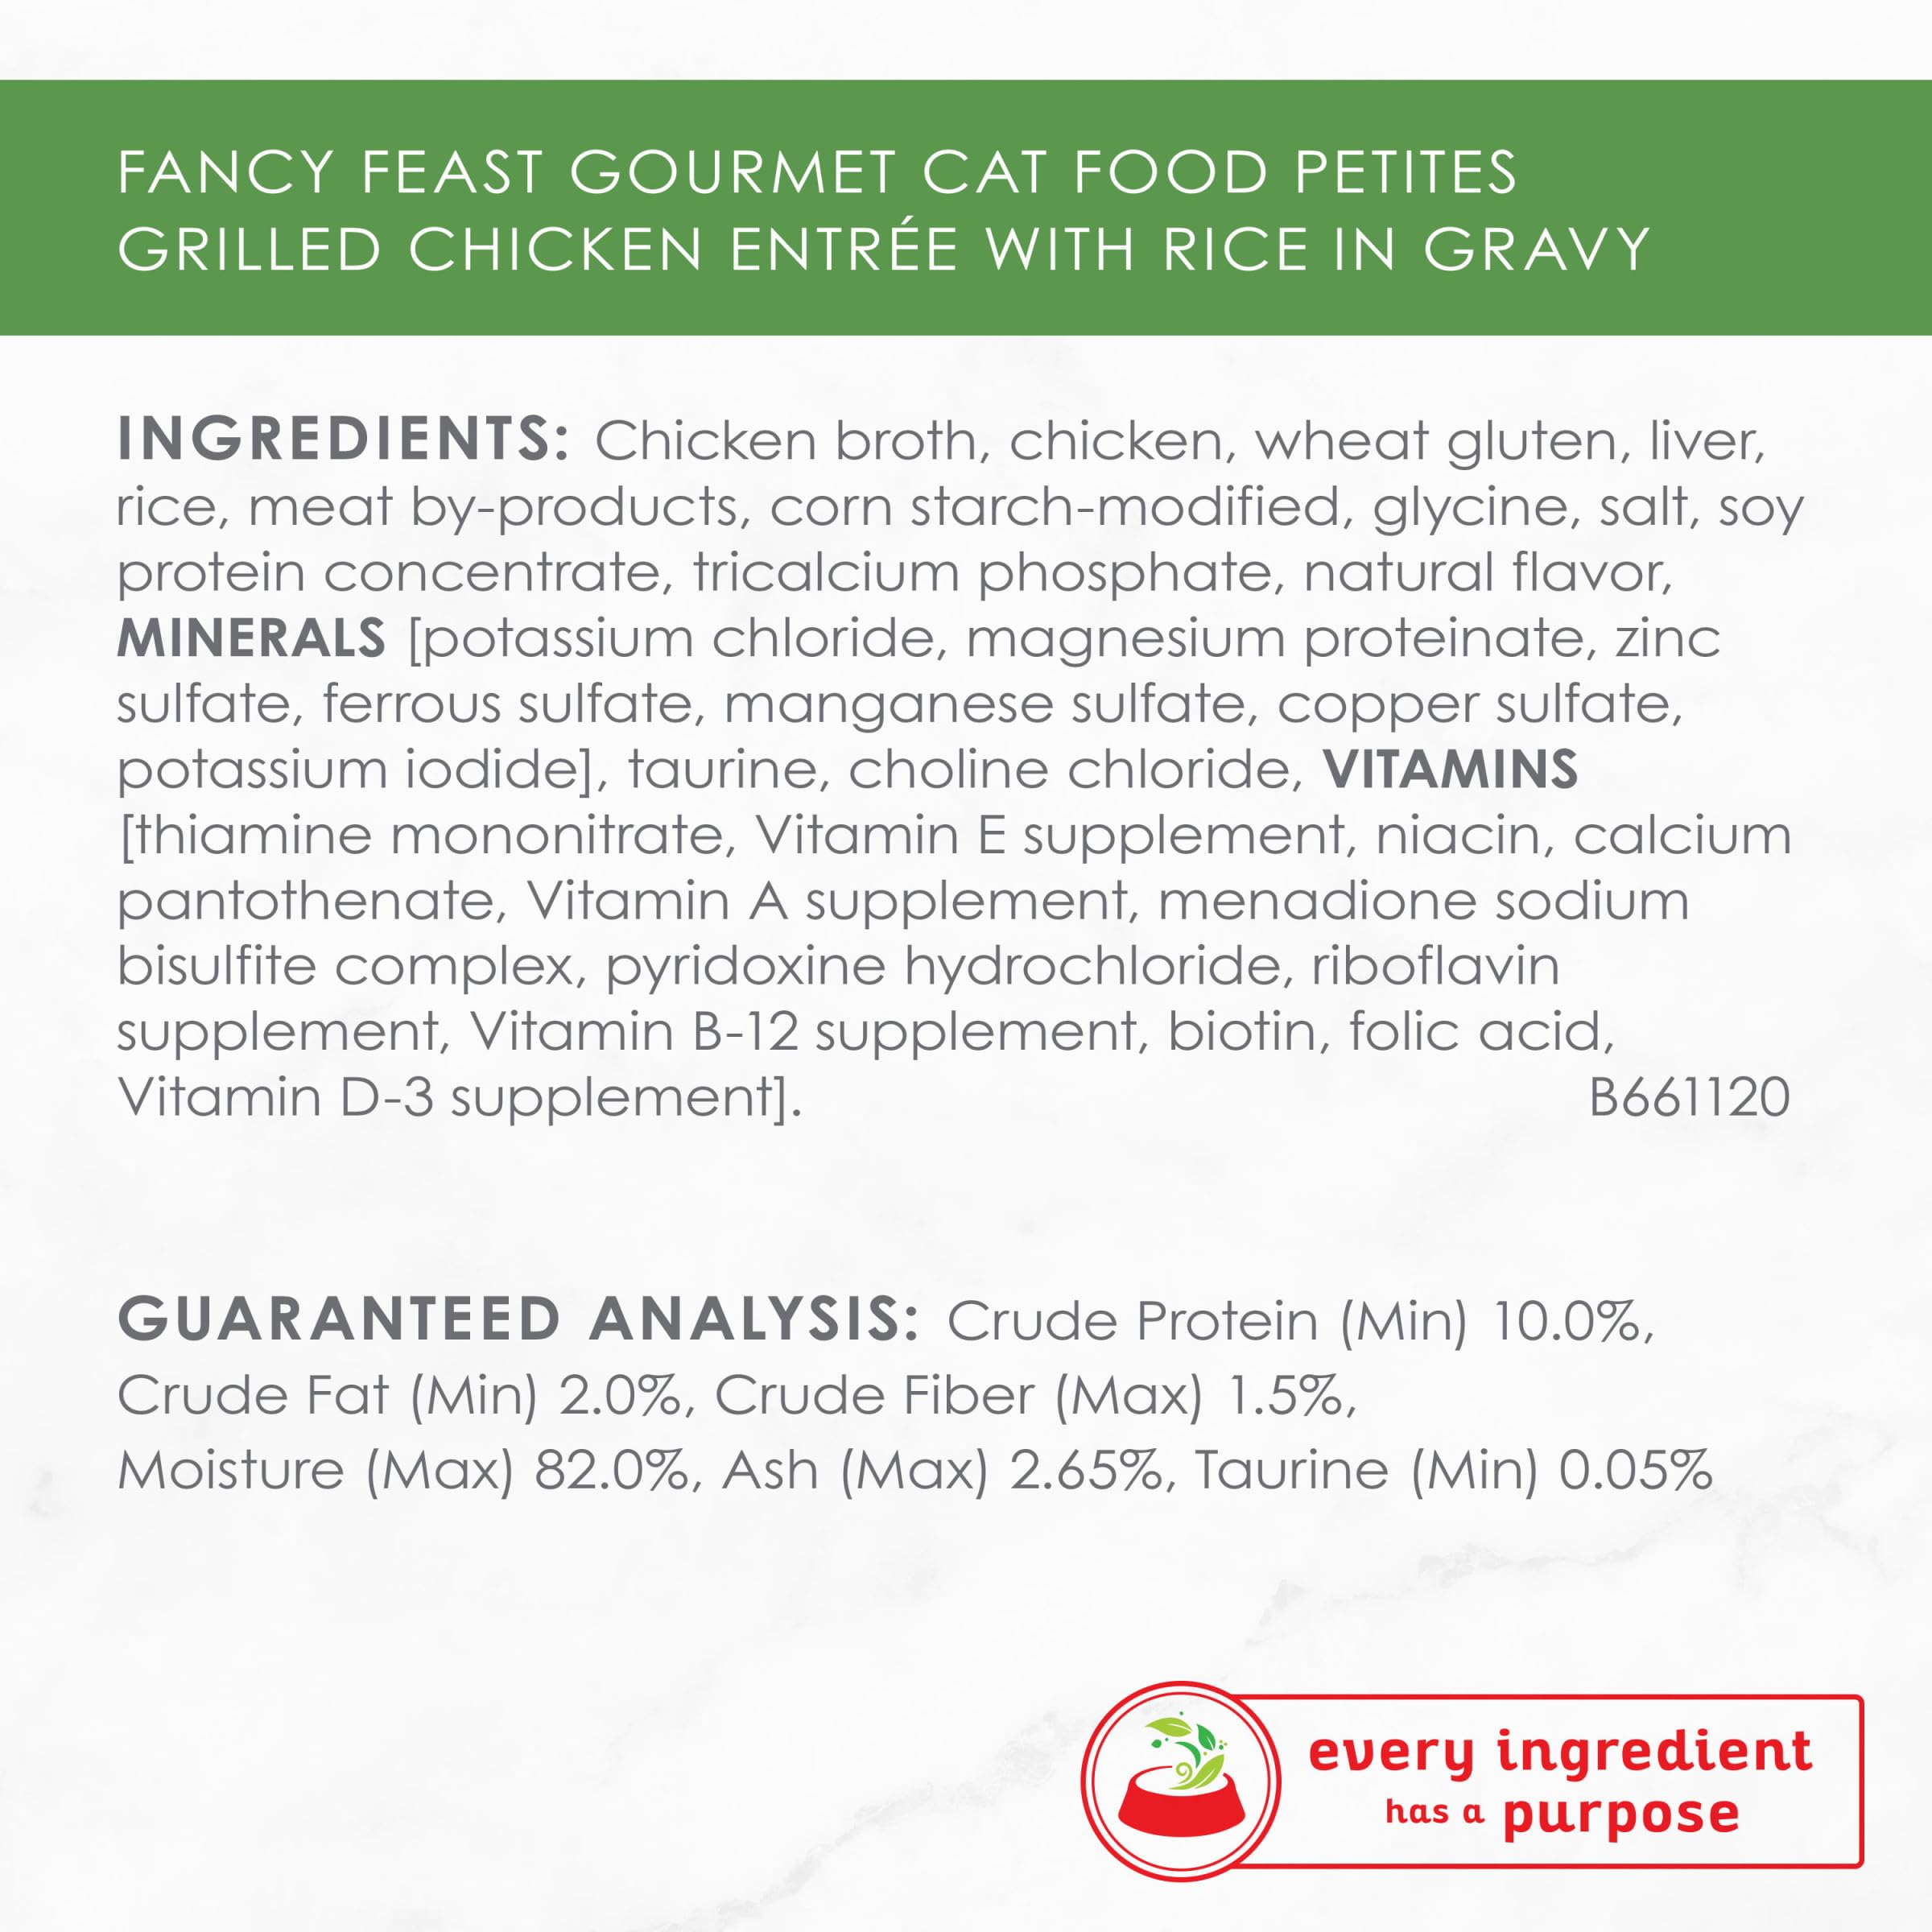 Purina Fancy Feast Petites Grilled Chicken and Rice in Gravy Wet Cat Food Trays - 2.8 Oz - Case of 12  